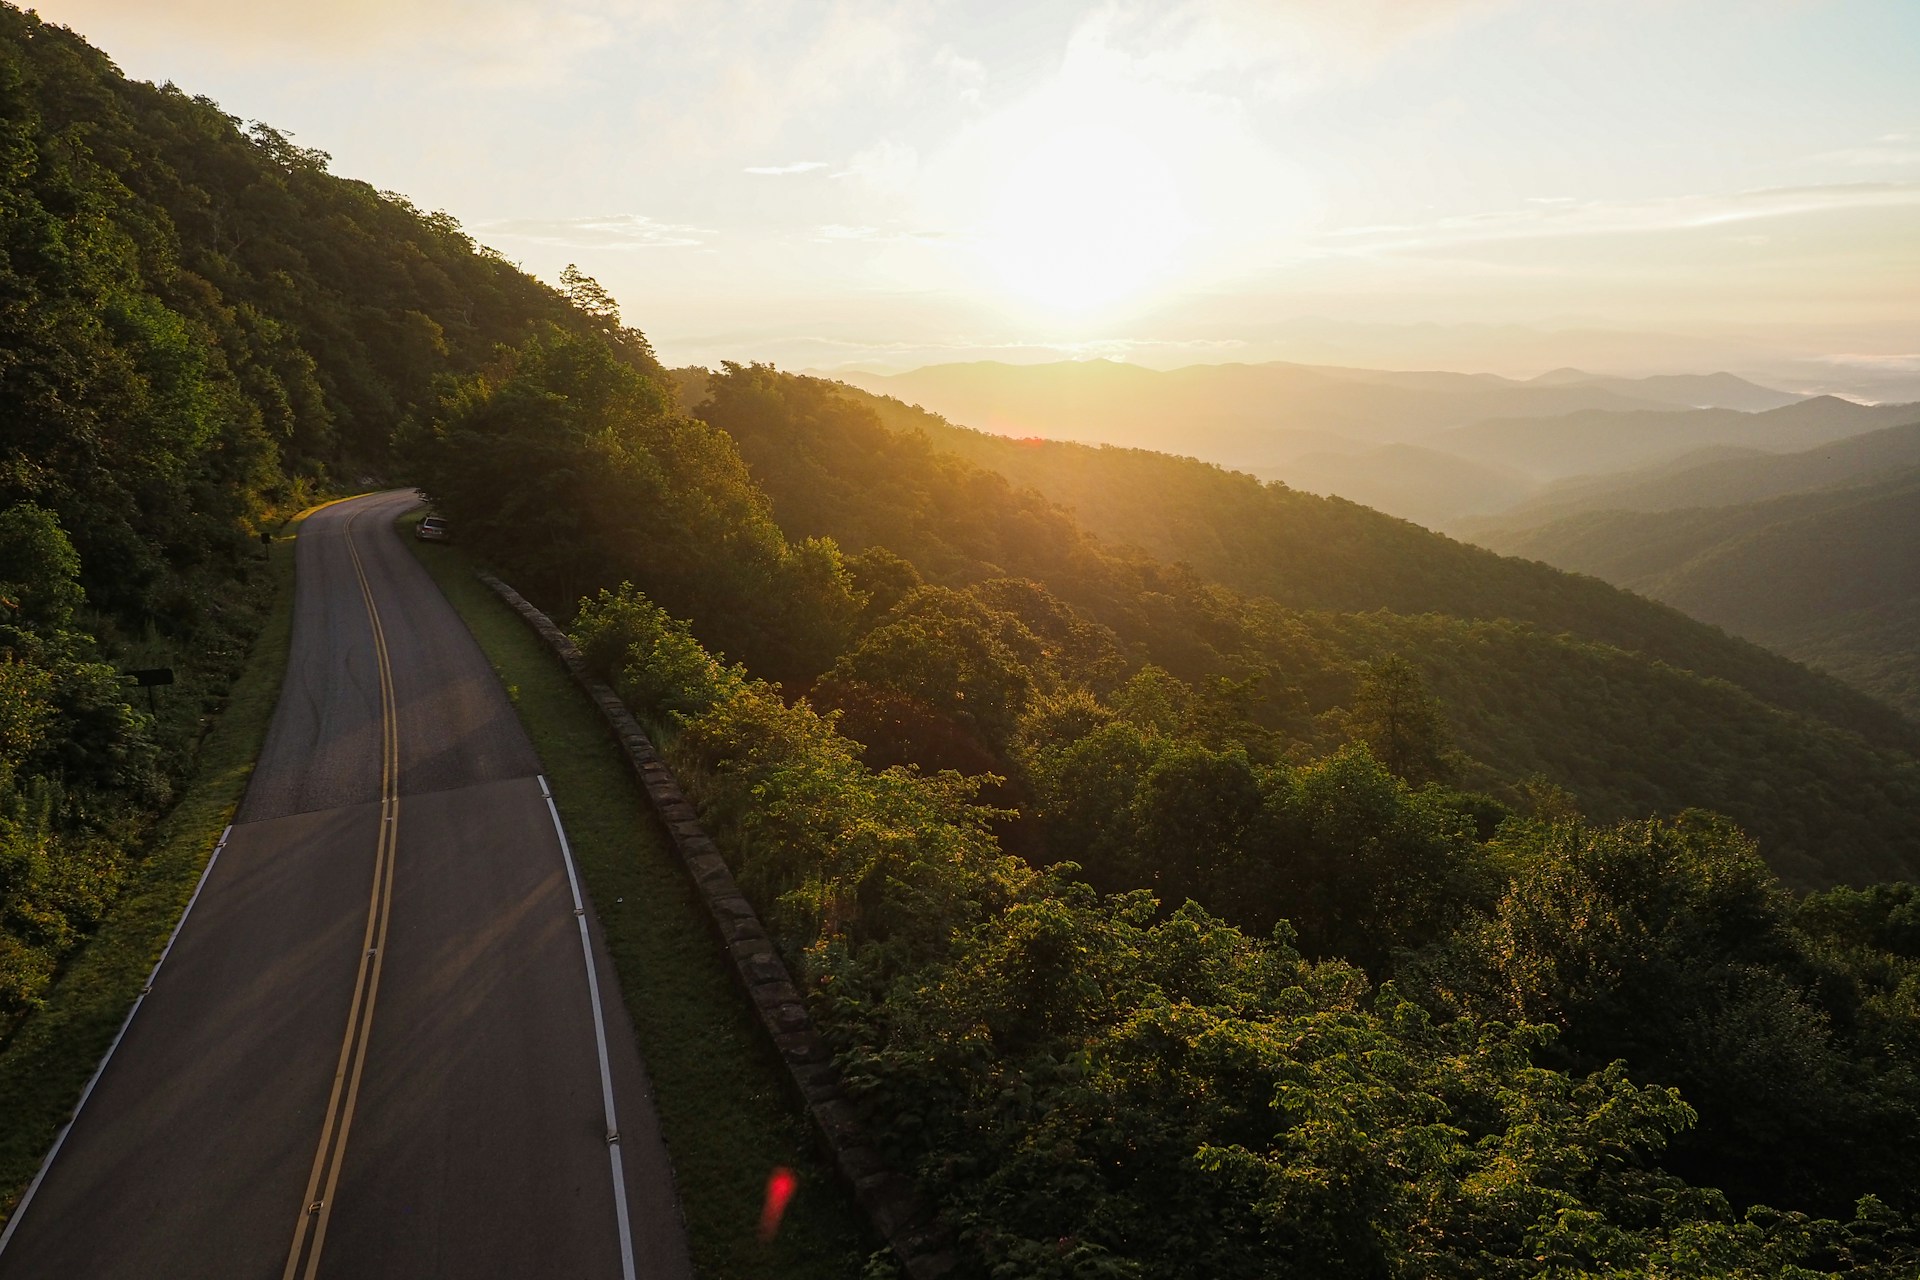 Vacationing in the Smoky Mountains, Asheville NC, and NYC Without Breaking the Bank